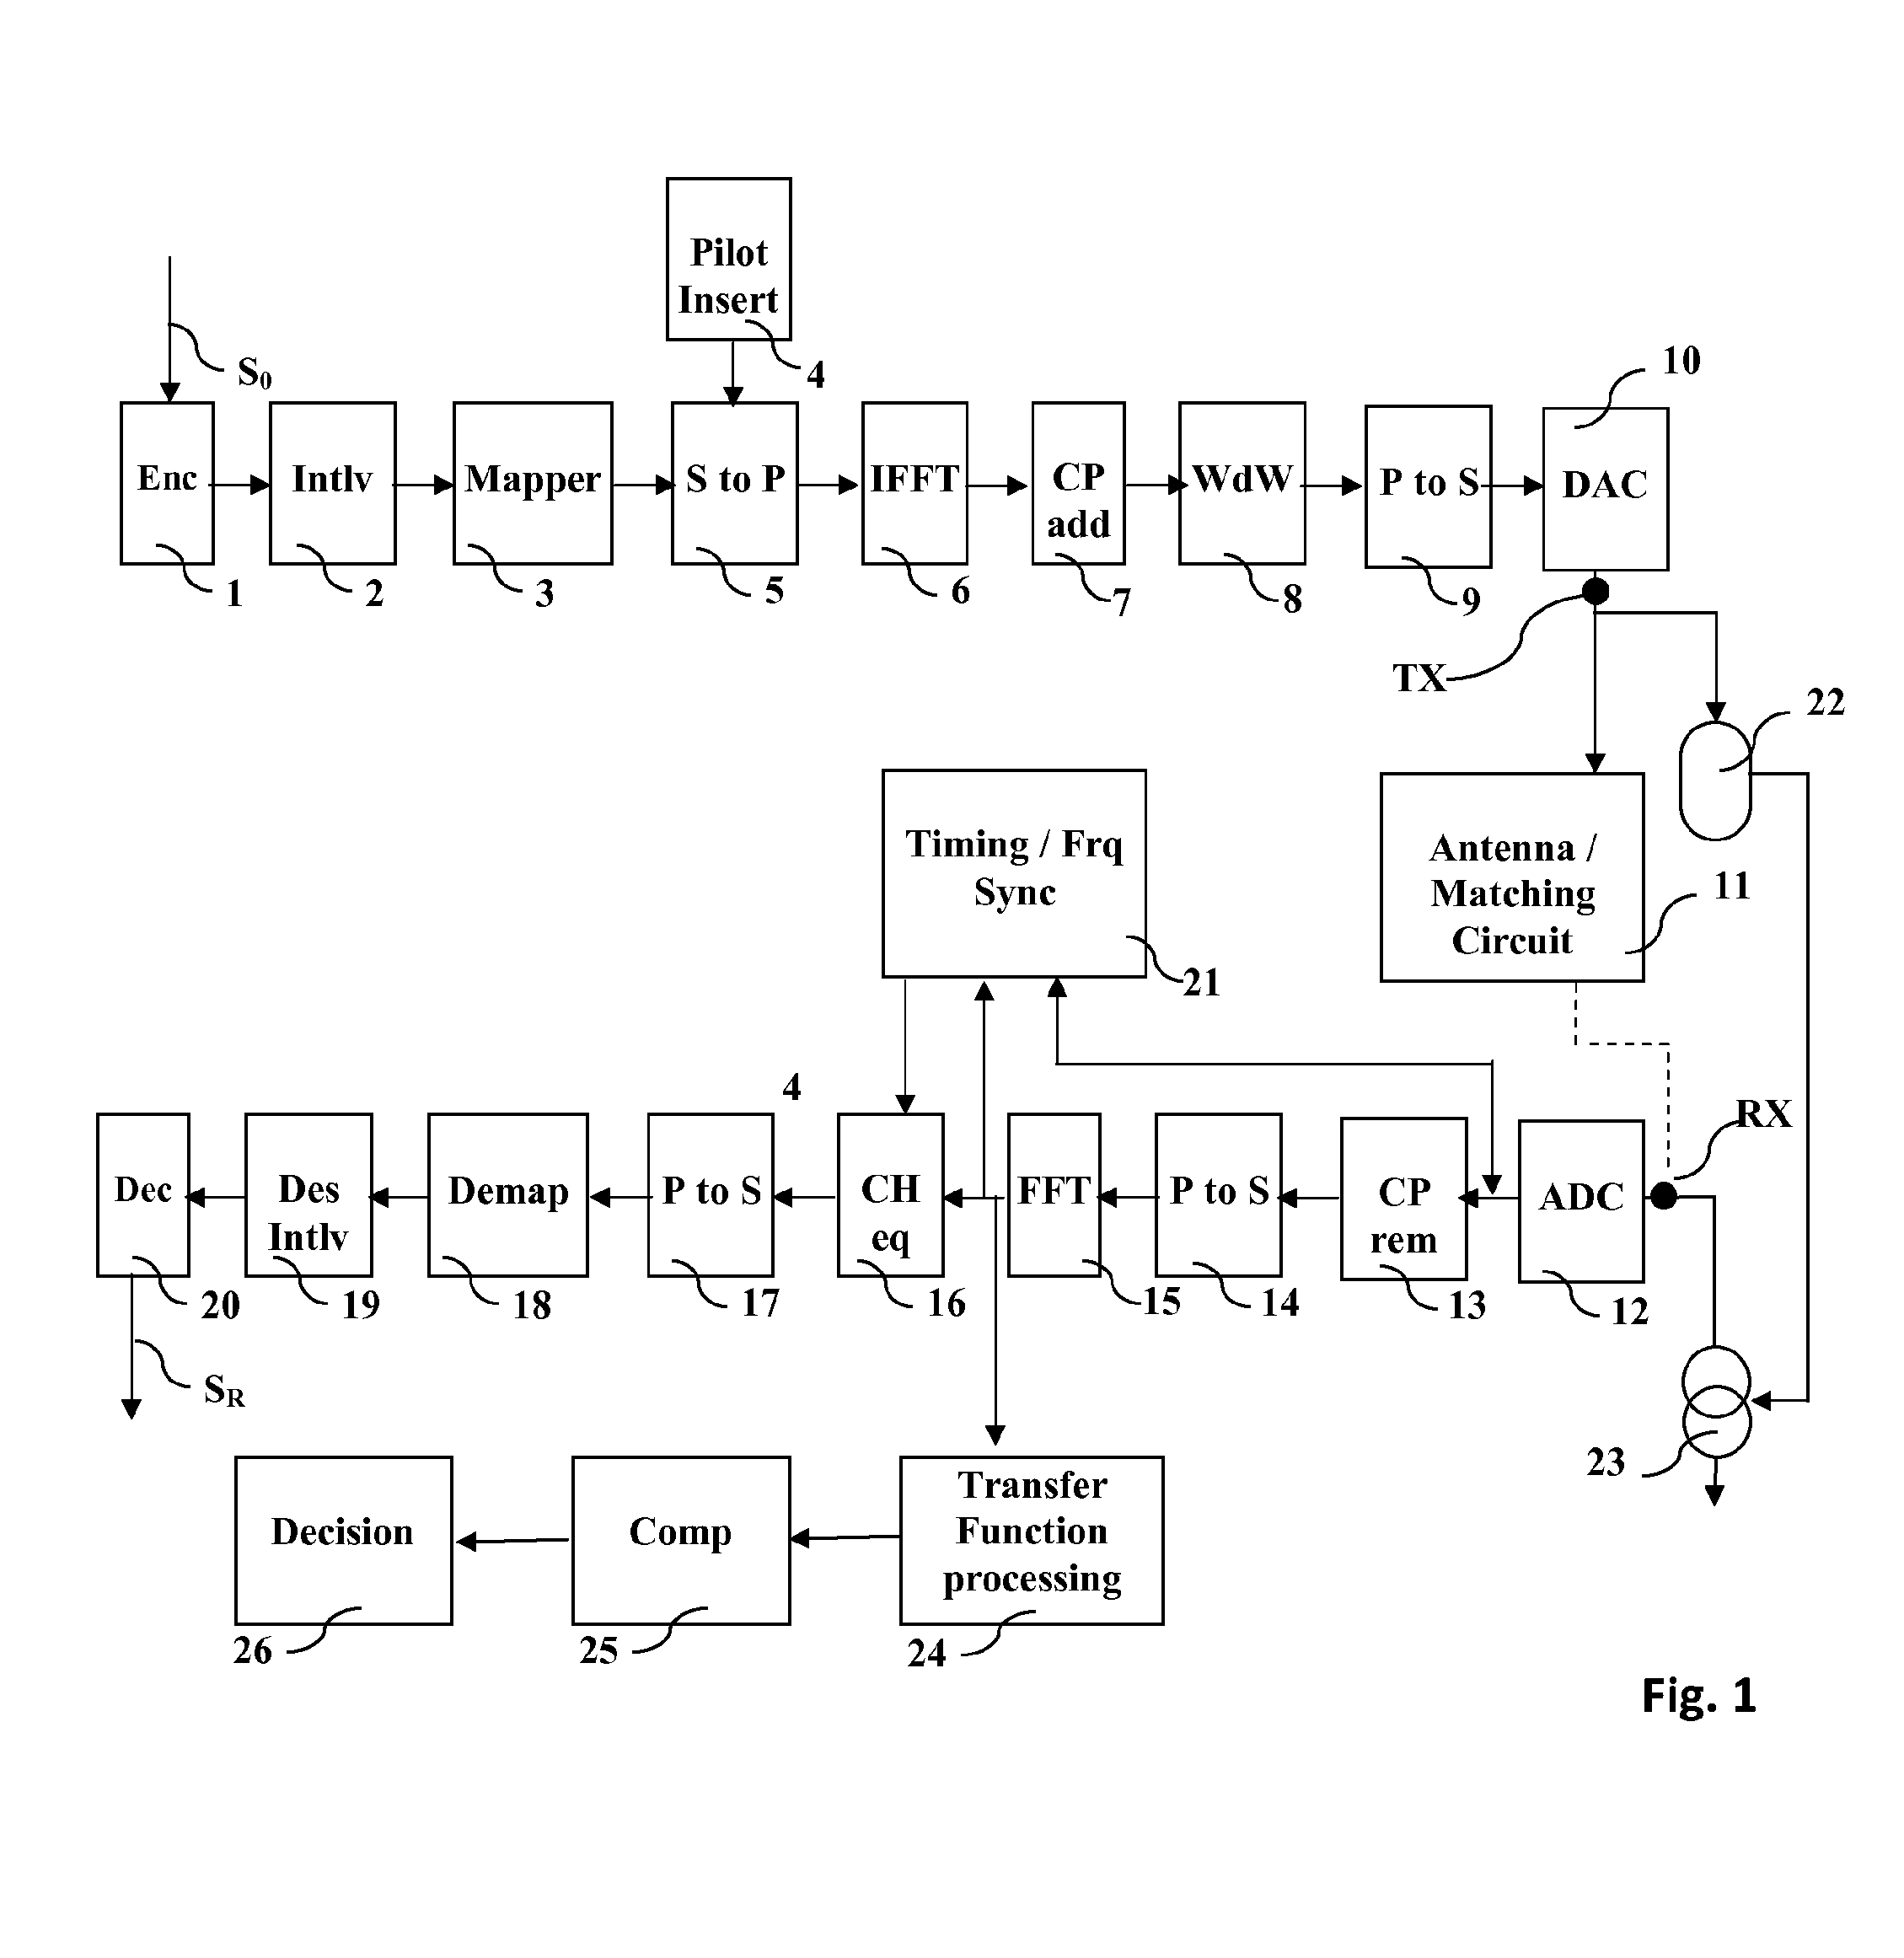 Built-In Self-Test Technique for Detection of Imperfectly Connected Antenna in OFDM Transceivers